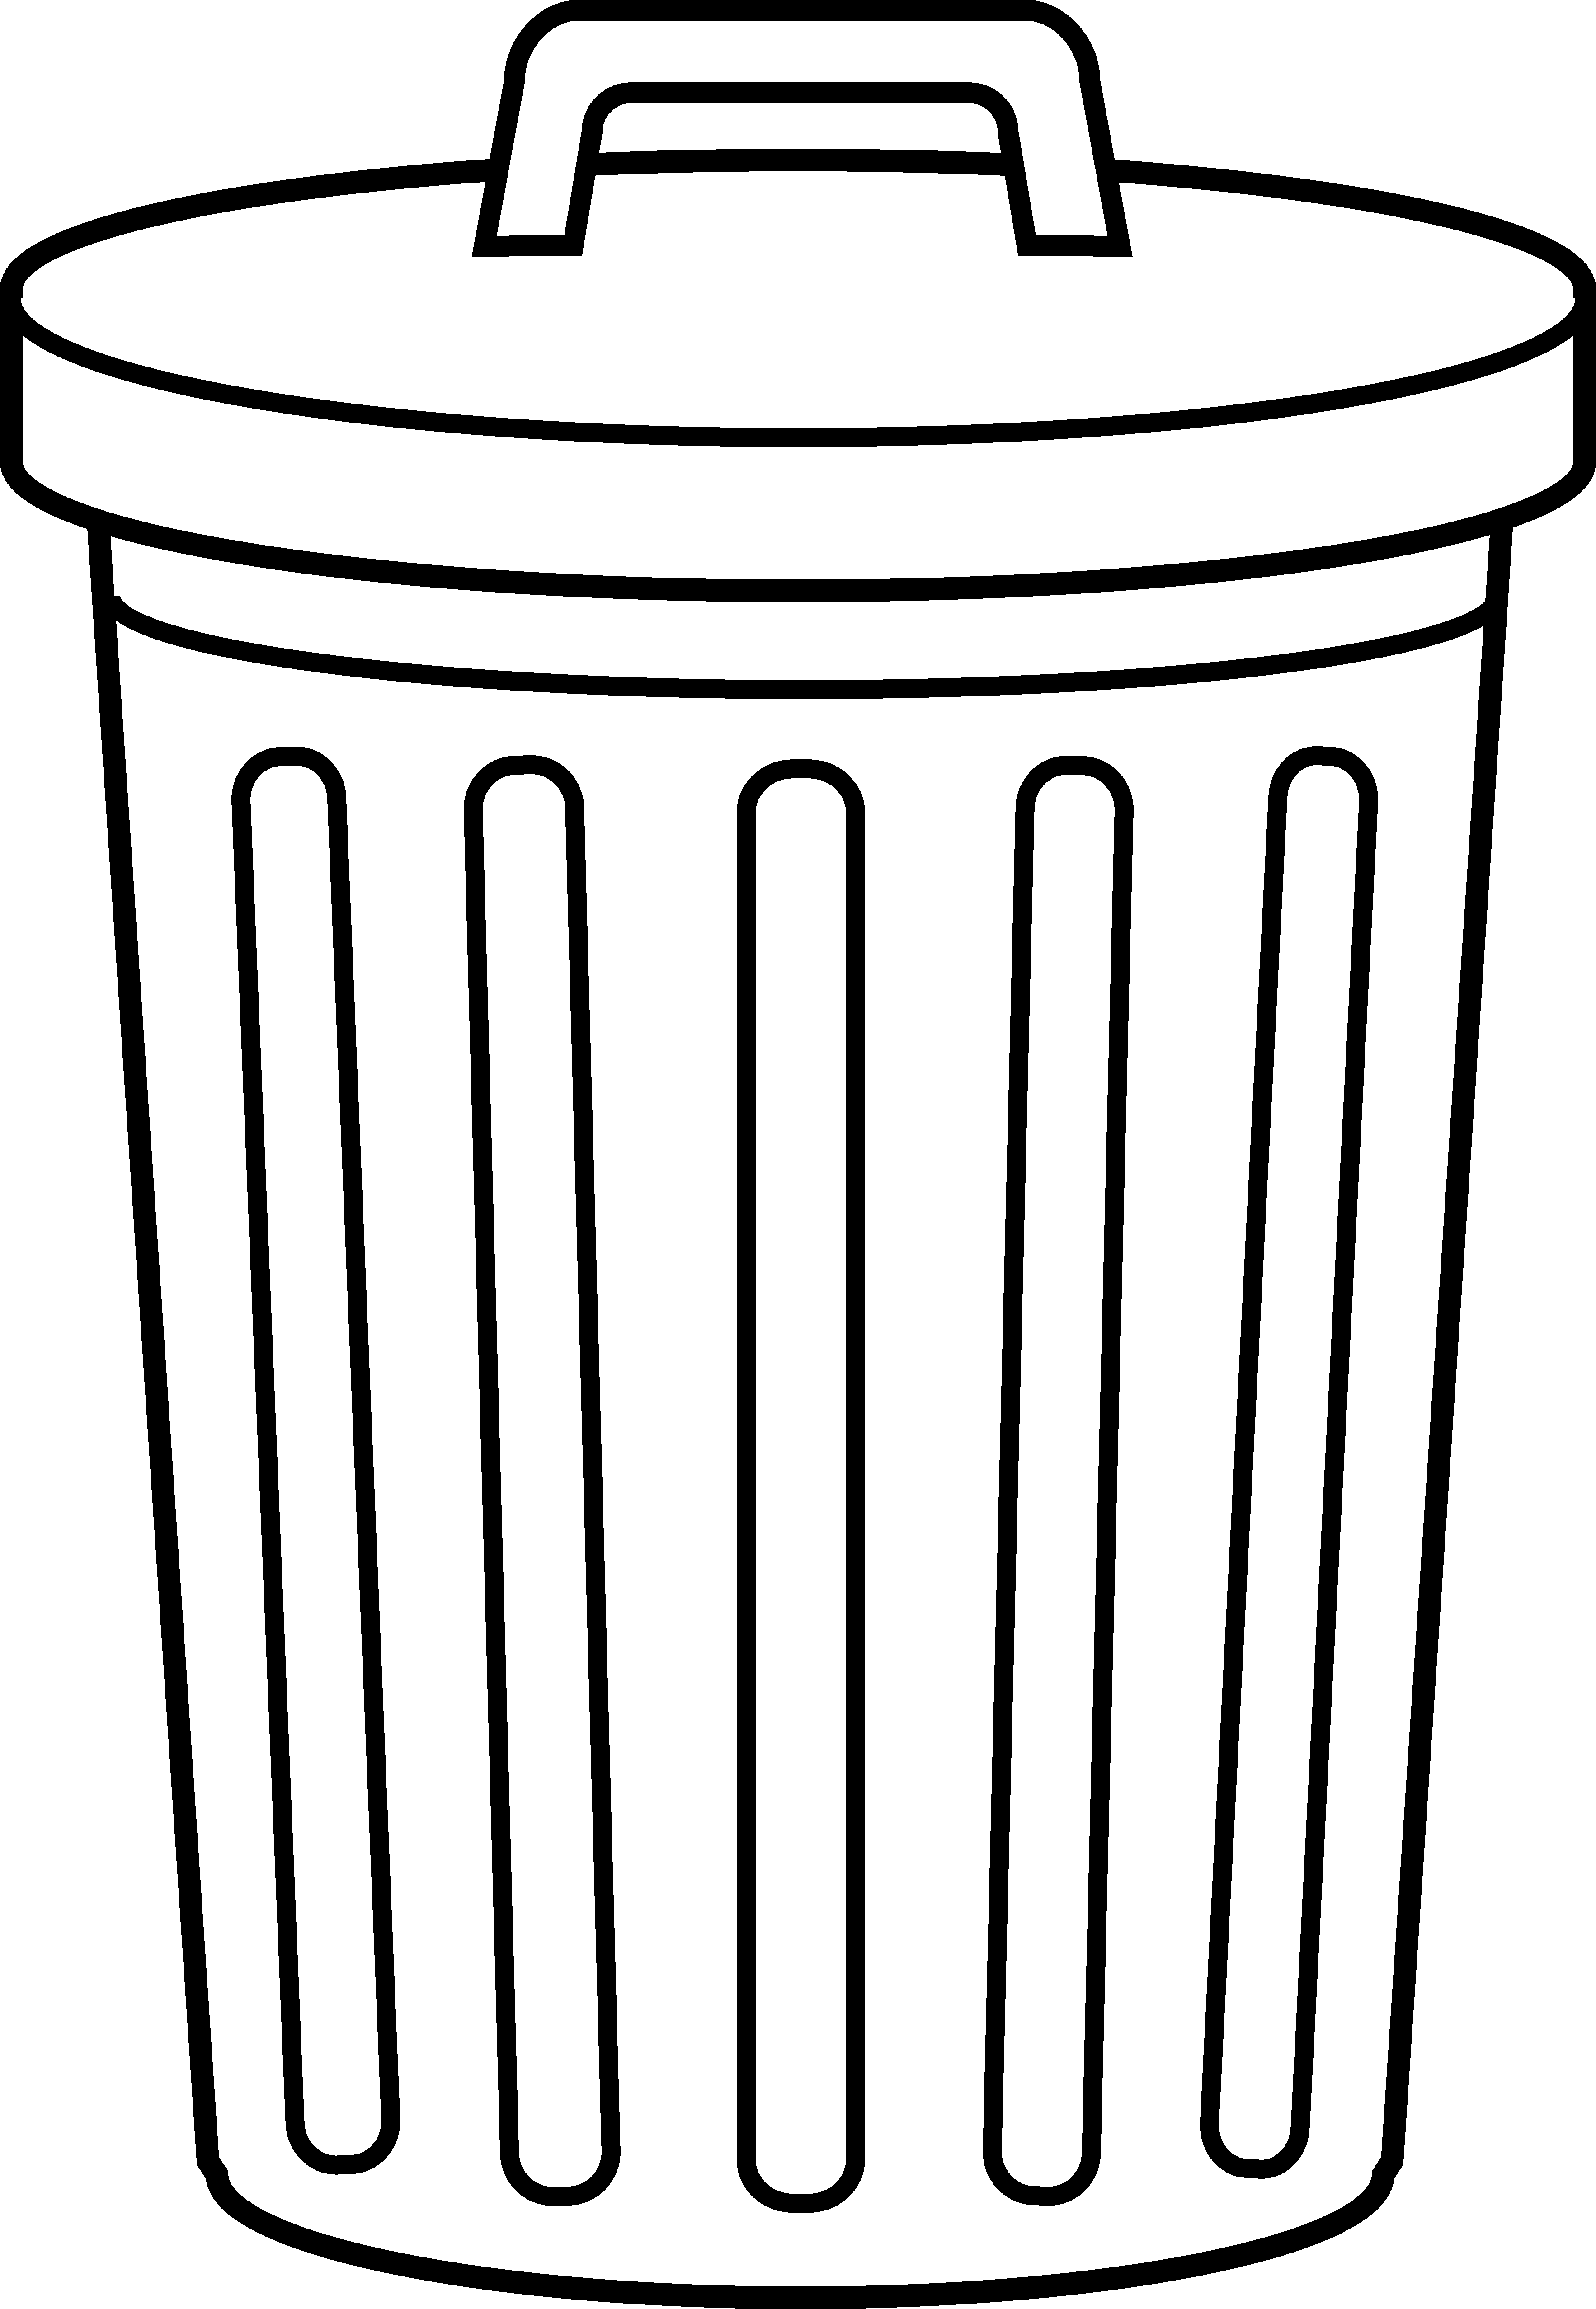 Outline clipart bin.  collection of trash